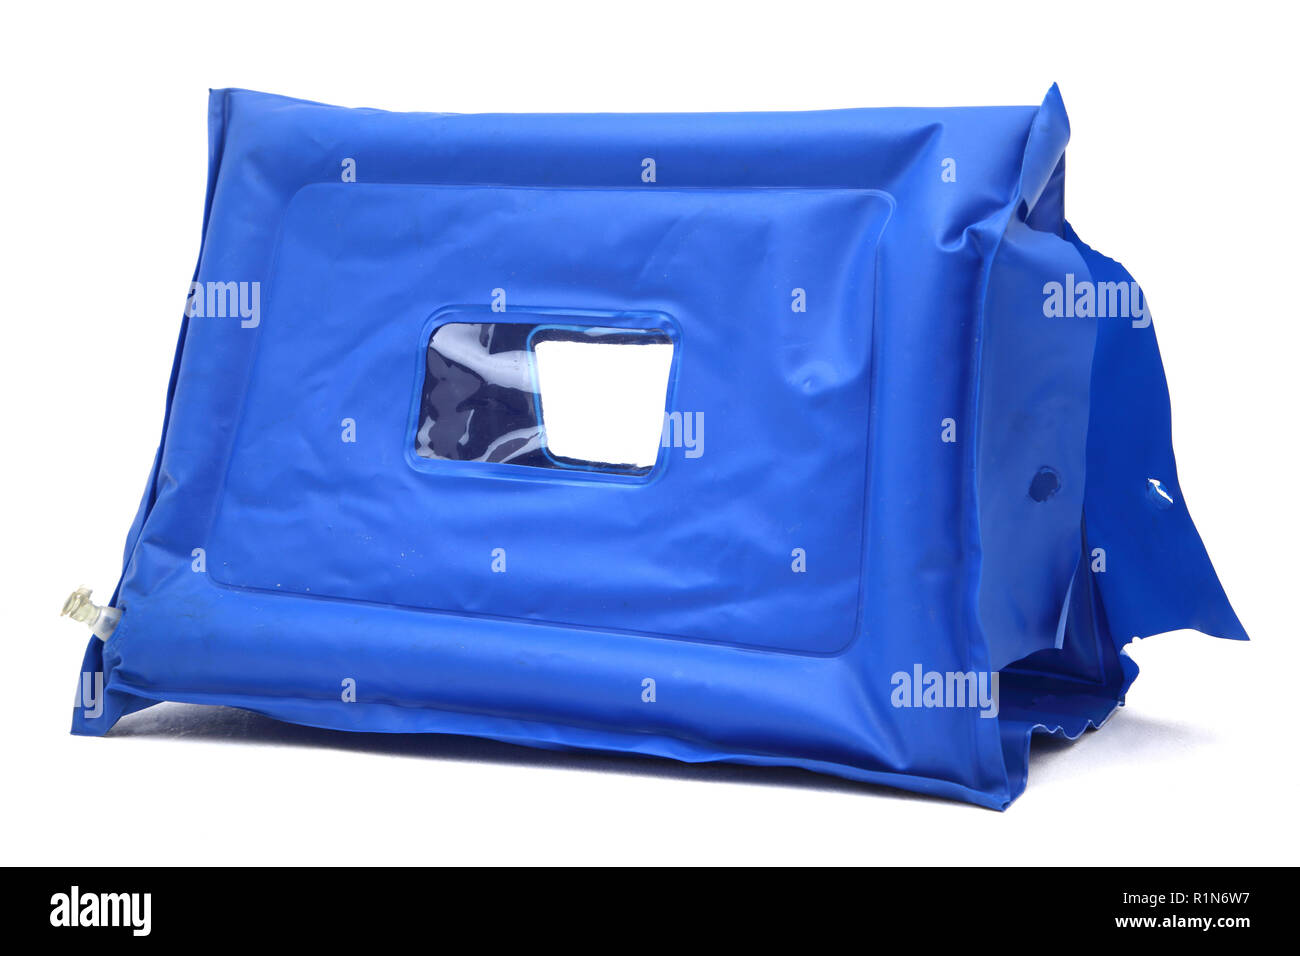 Vintage 1970's Sindy's Foldaway Inflatable Tent Stock Photo